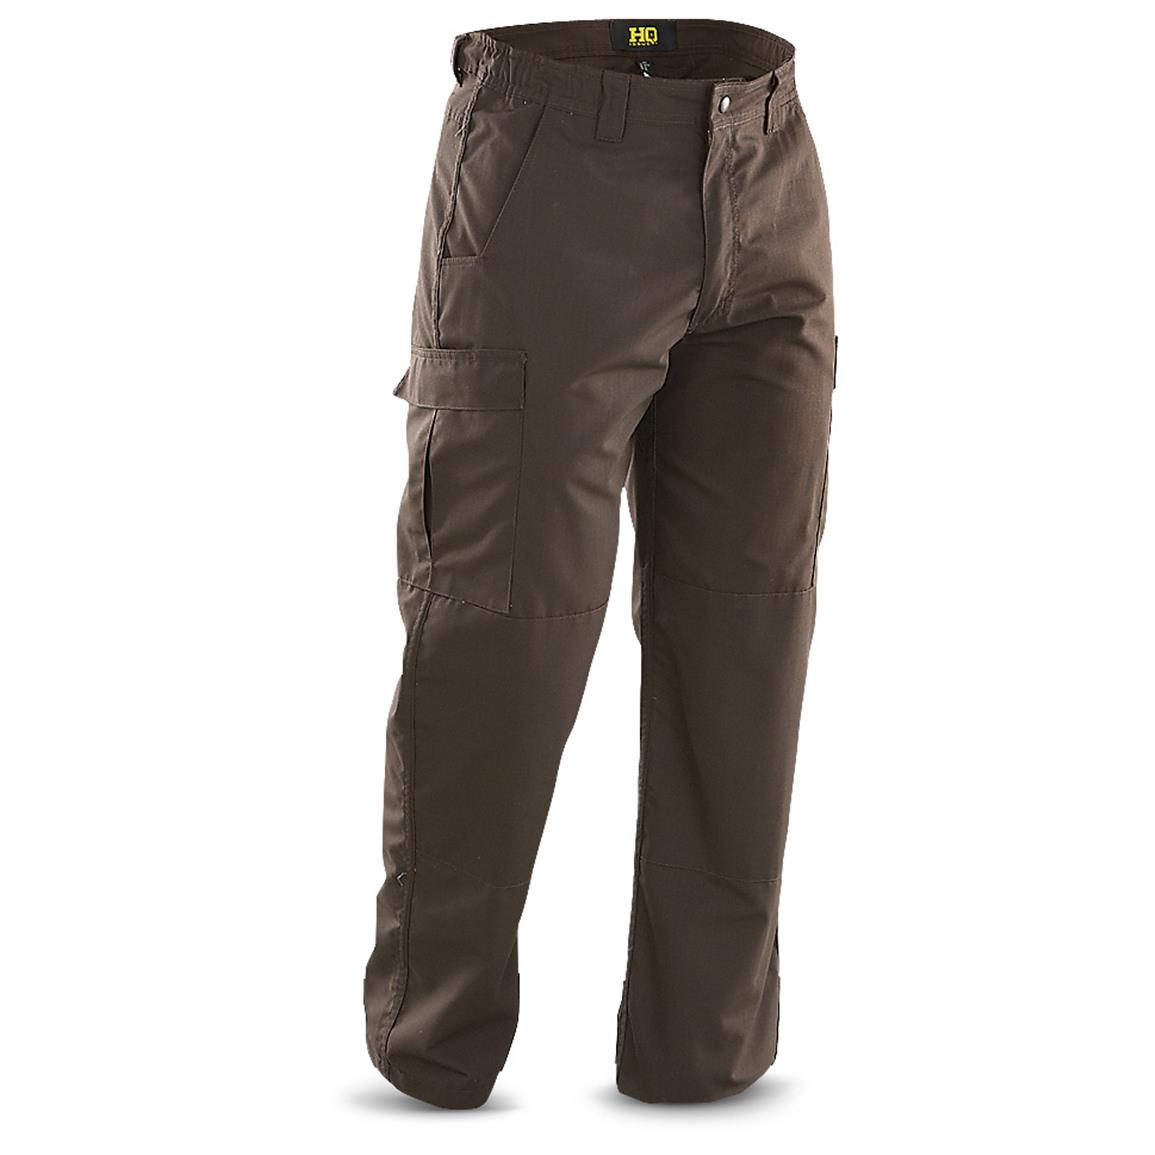 HQ ISSUE® Ripstop Tactical Cargo Pants - 592332, Pants at Sportsman's Guide